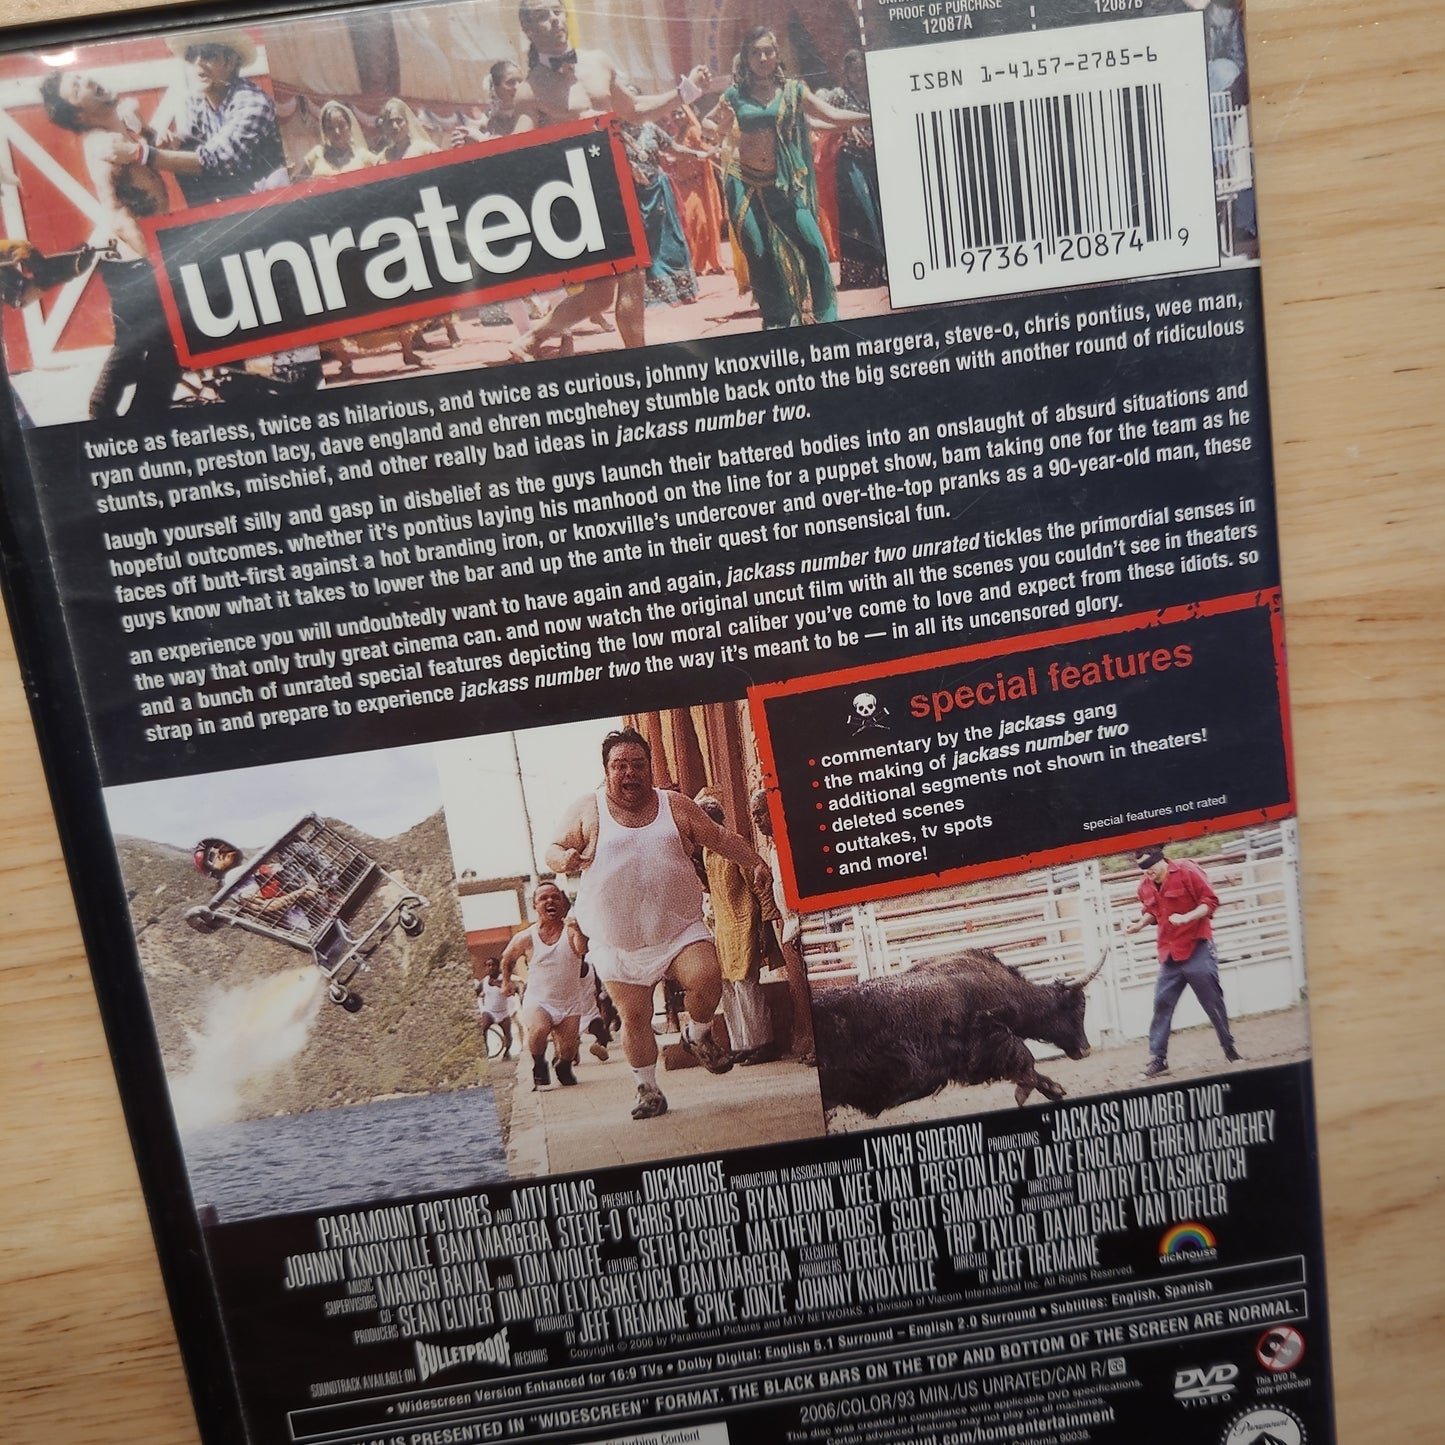 Jackass Number Two - Unrated DVD